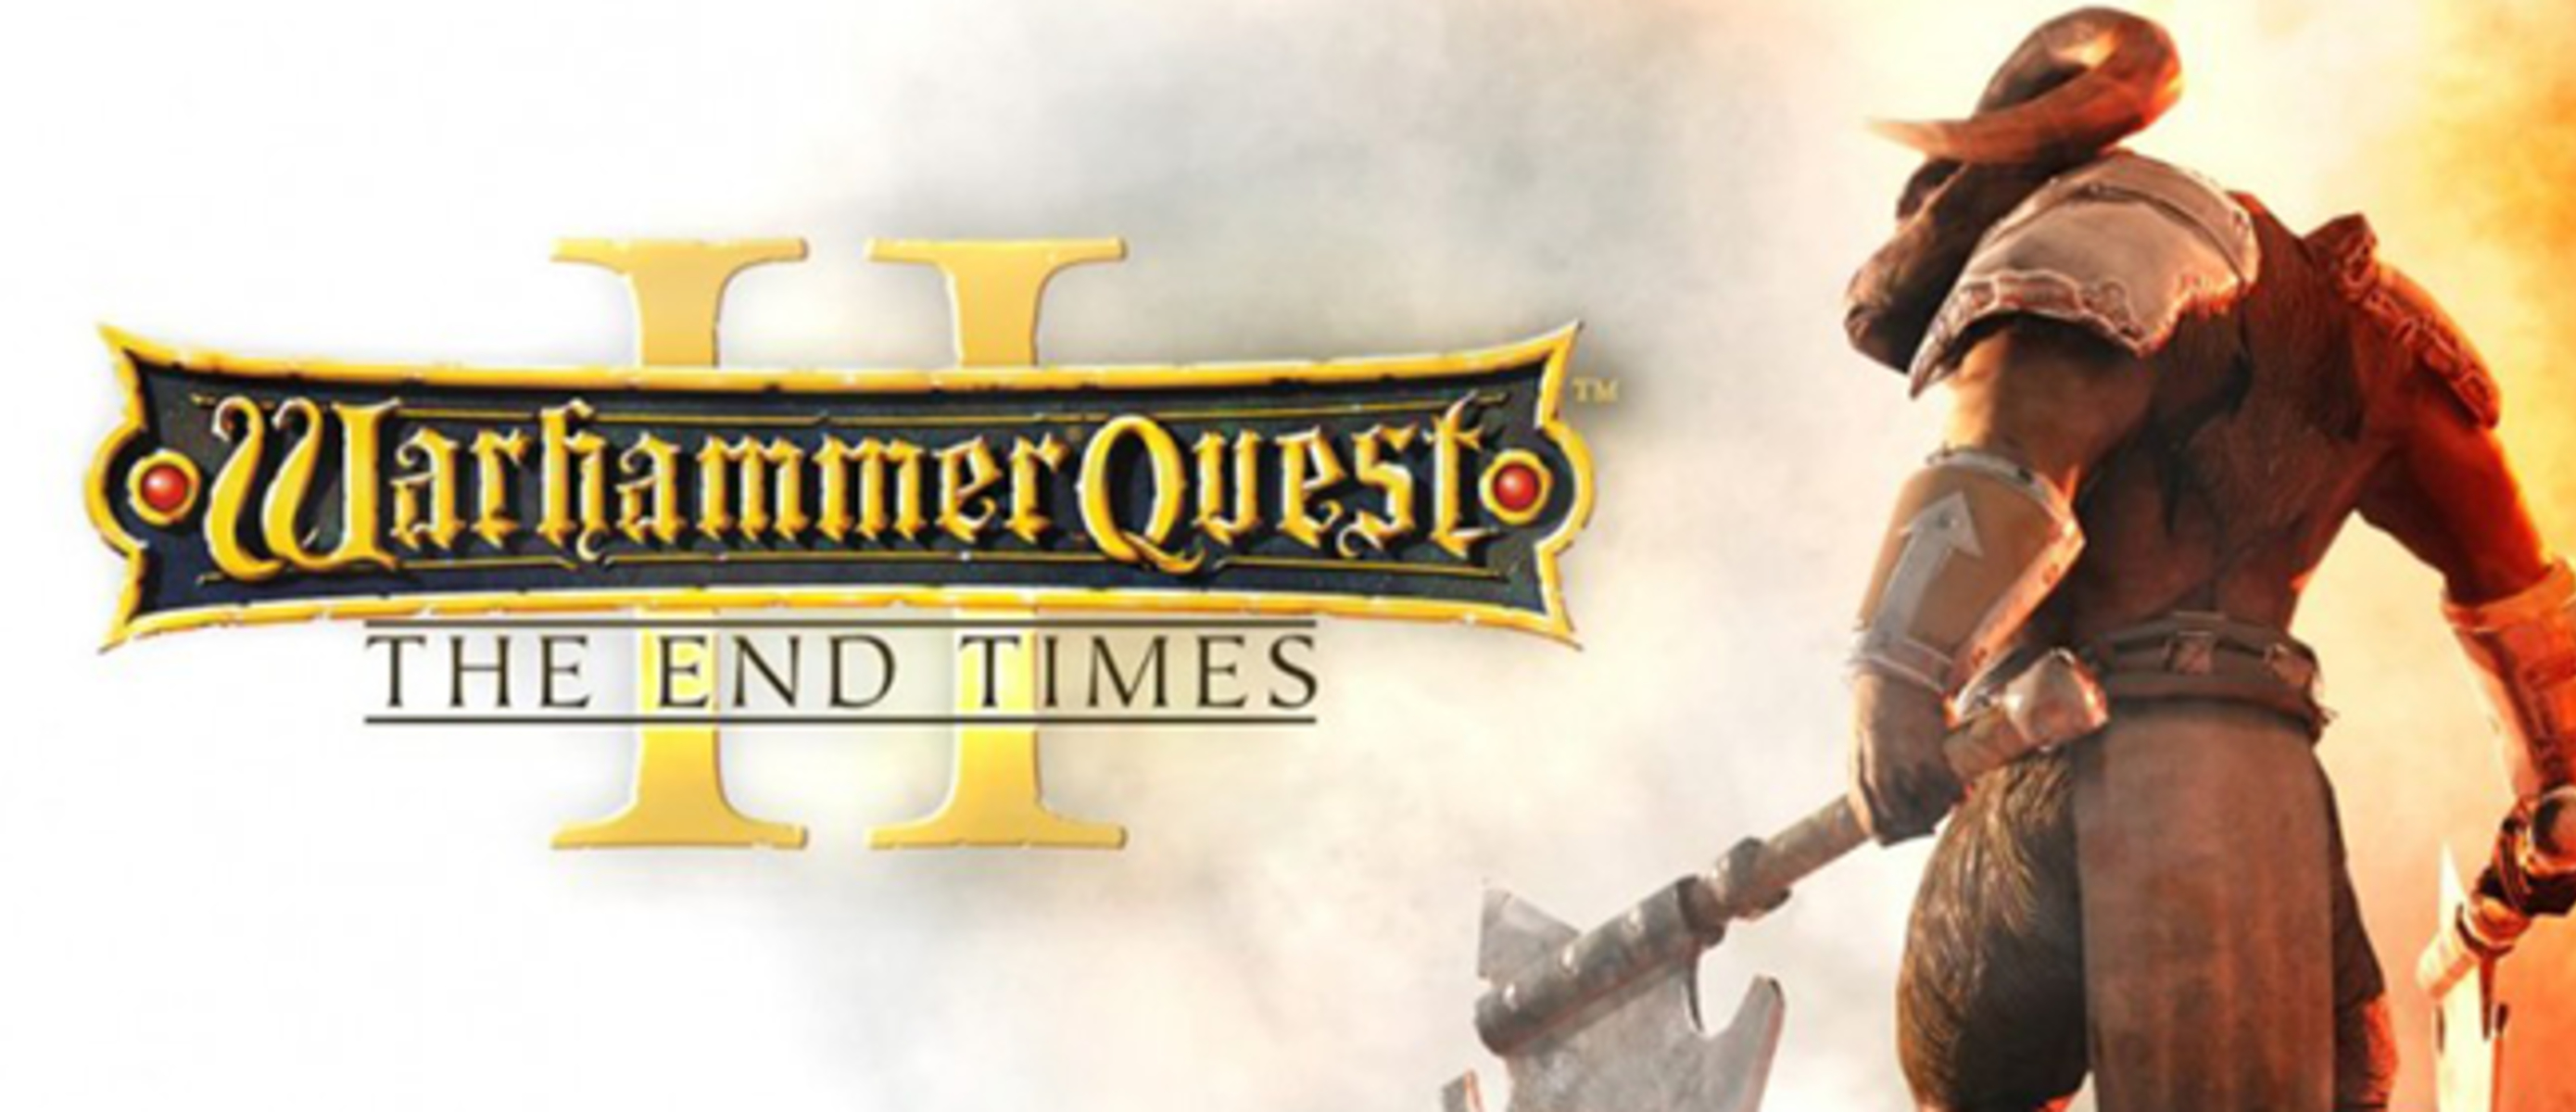 Warhammer quest 2. Warhammer Quest 2: the end times. Warhammer Quest. Warhammer Quest 2: the end times ps4. End of time.